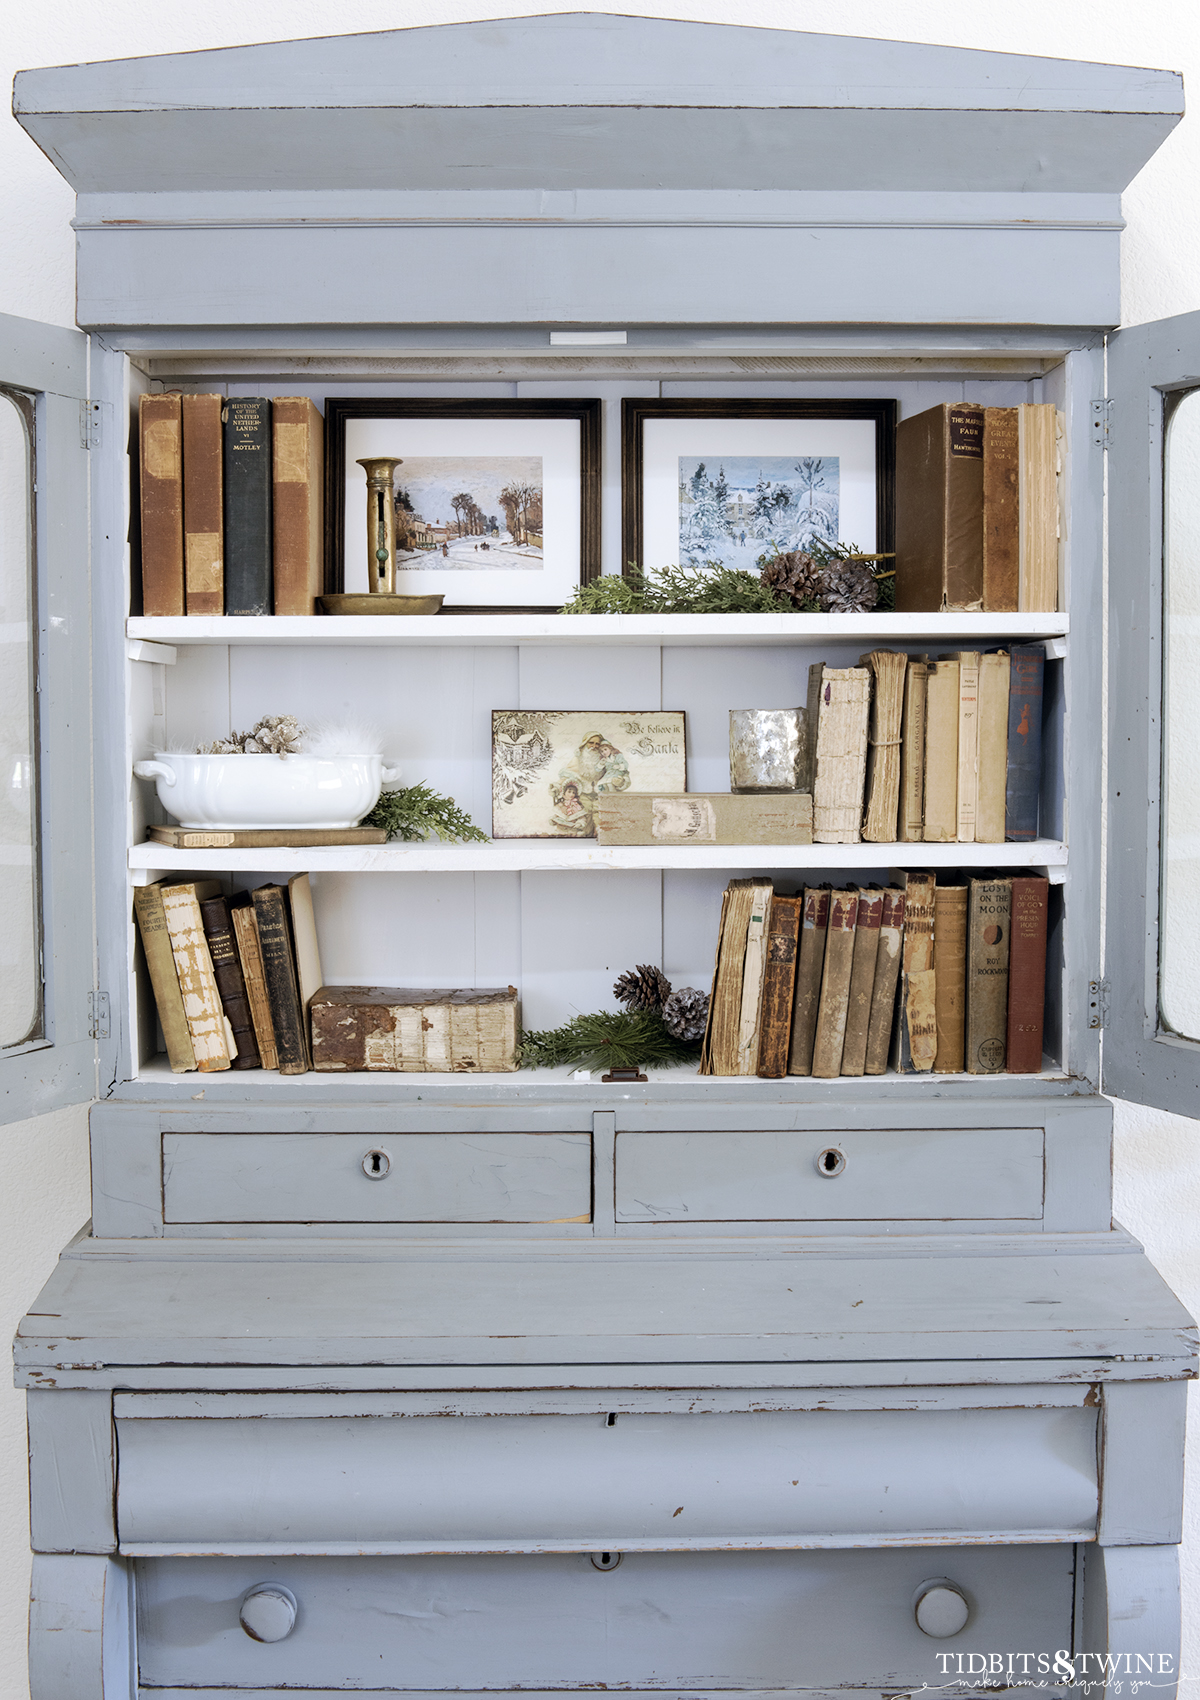 french blue cabinet with styled shelves holding antique books ironstone and greenery